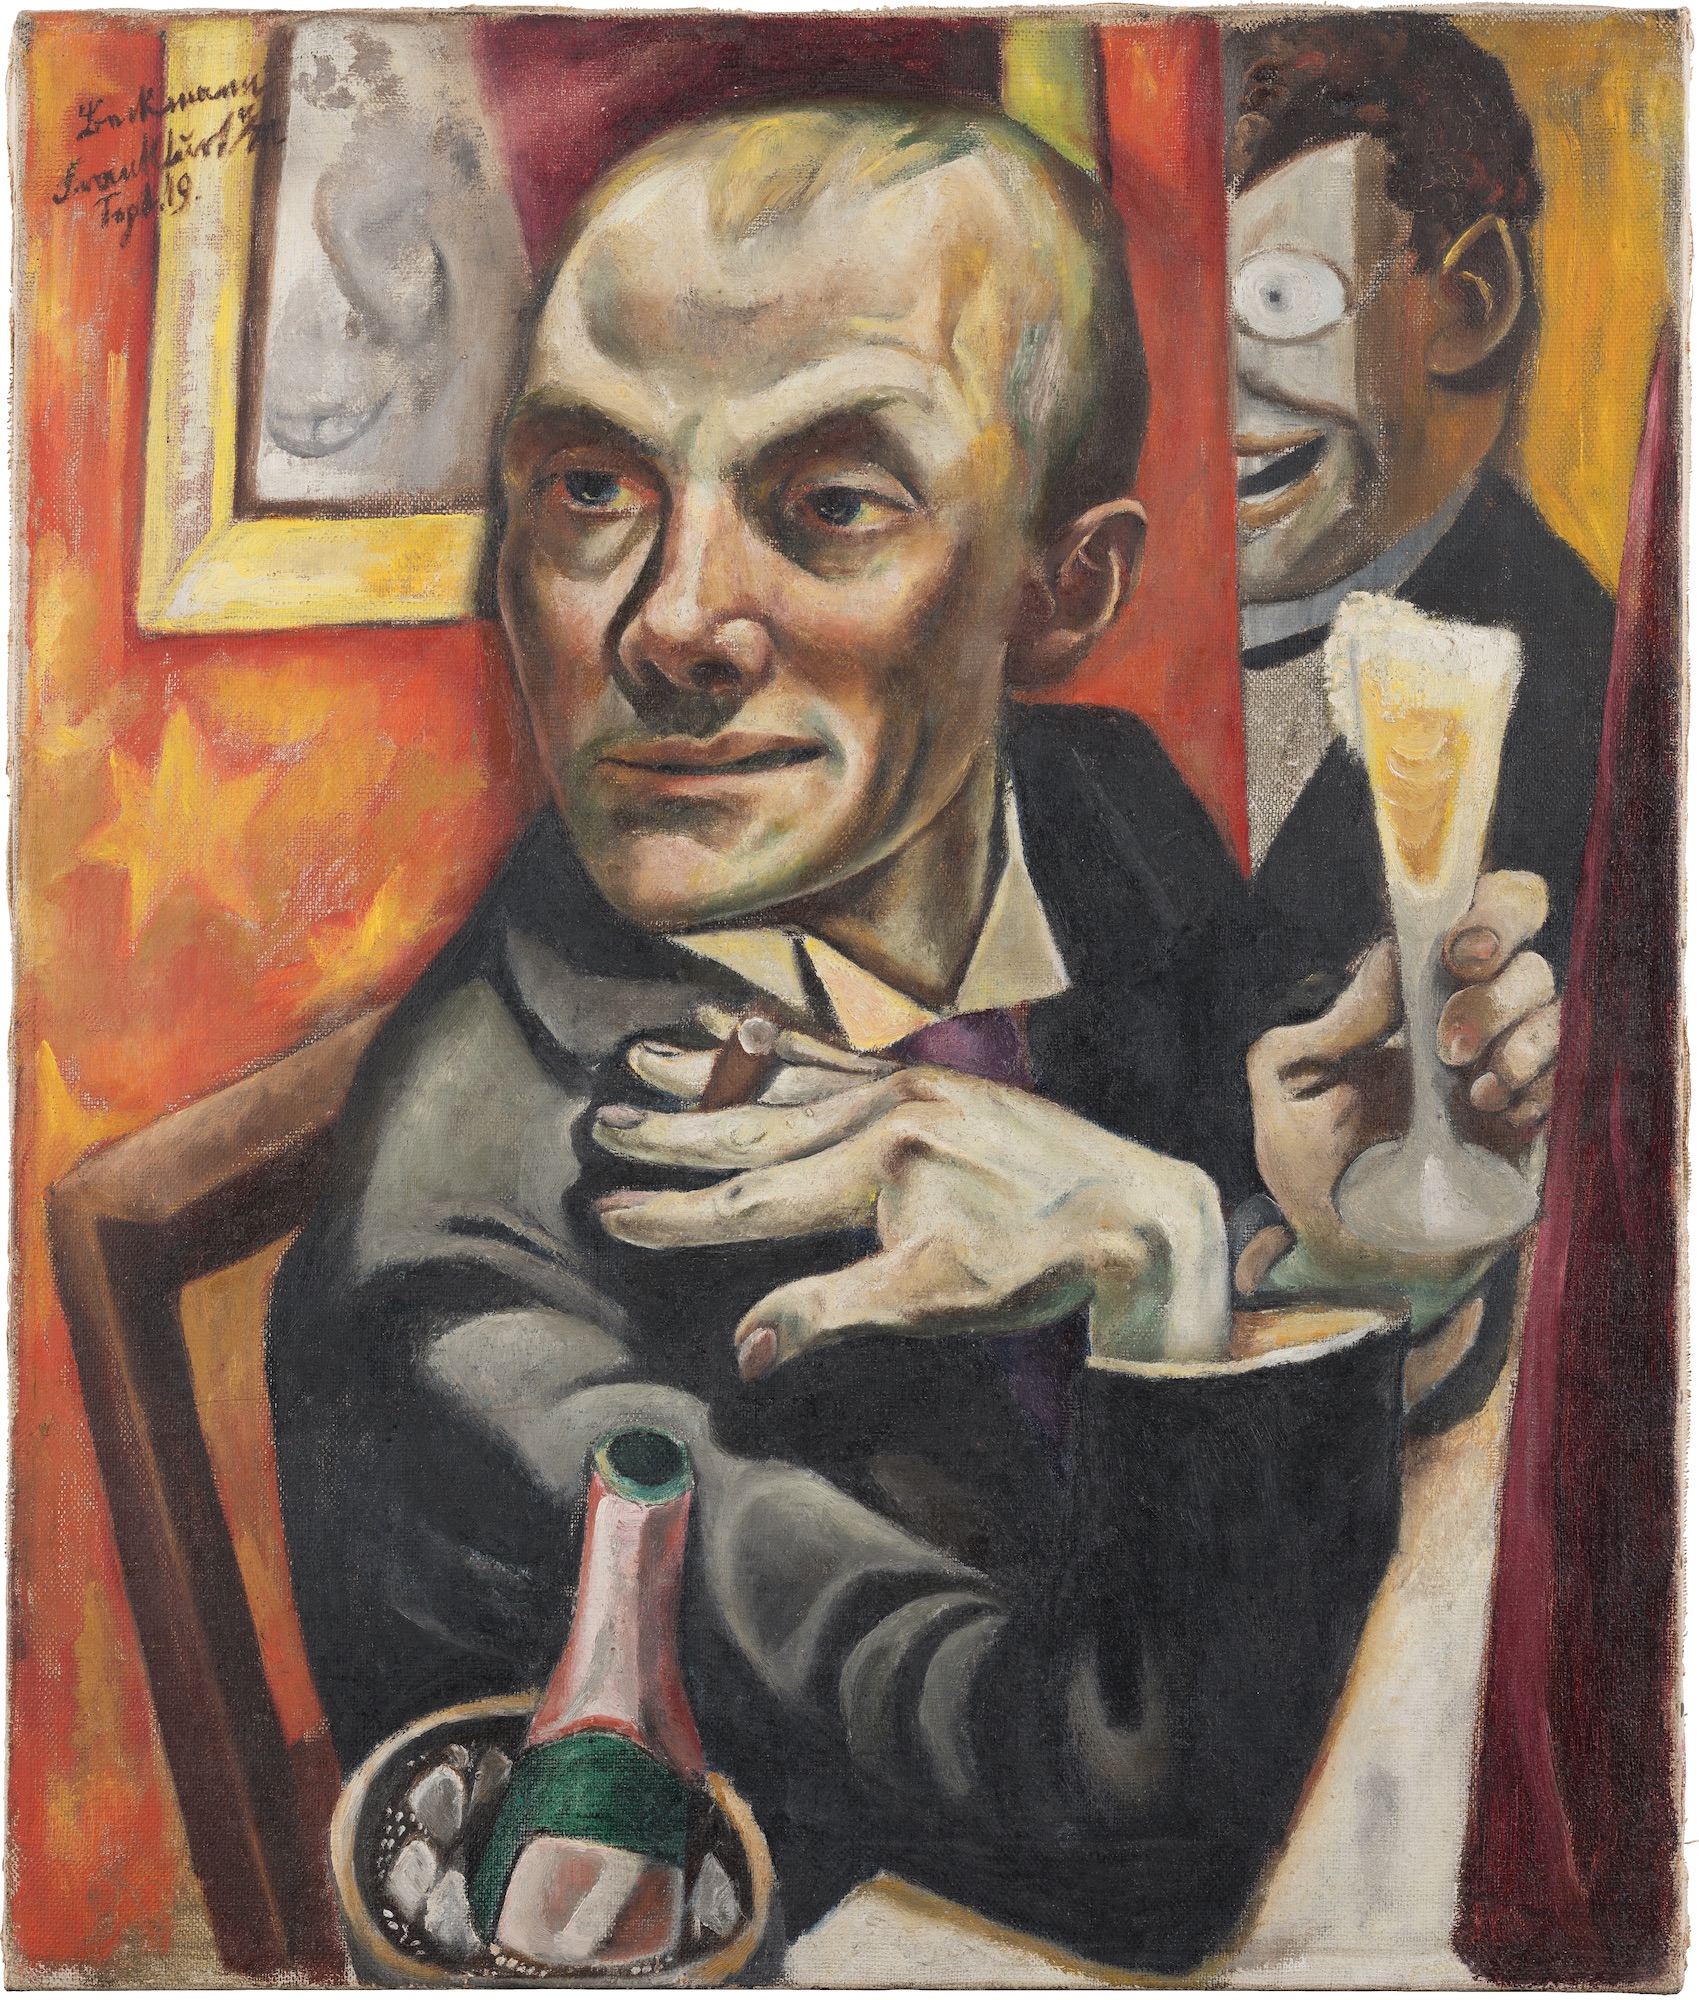 Self-Portrait with Champagne Glass by Max Beckmann - 1919 - 65.0 x 55.5 cm Städel Museum